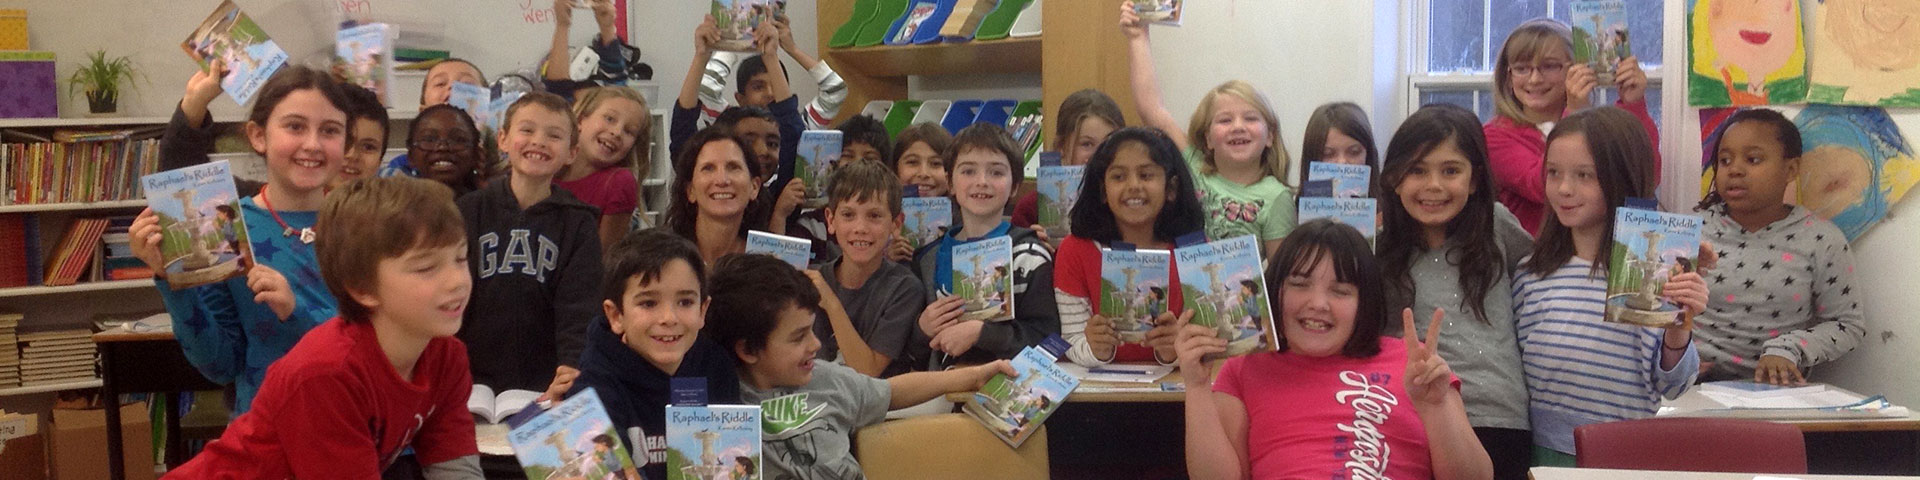 Karen smiles amongst school children who hold up copies of Raphael's Riddle